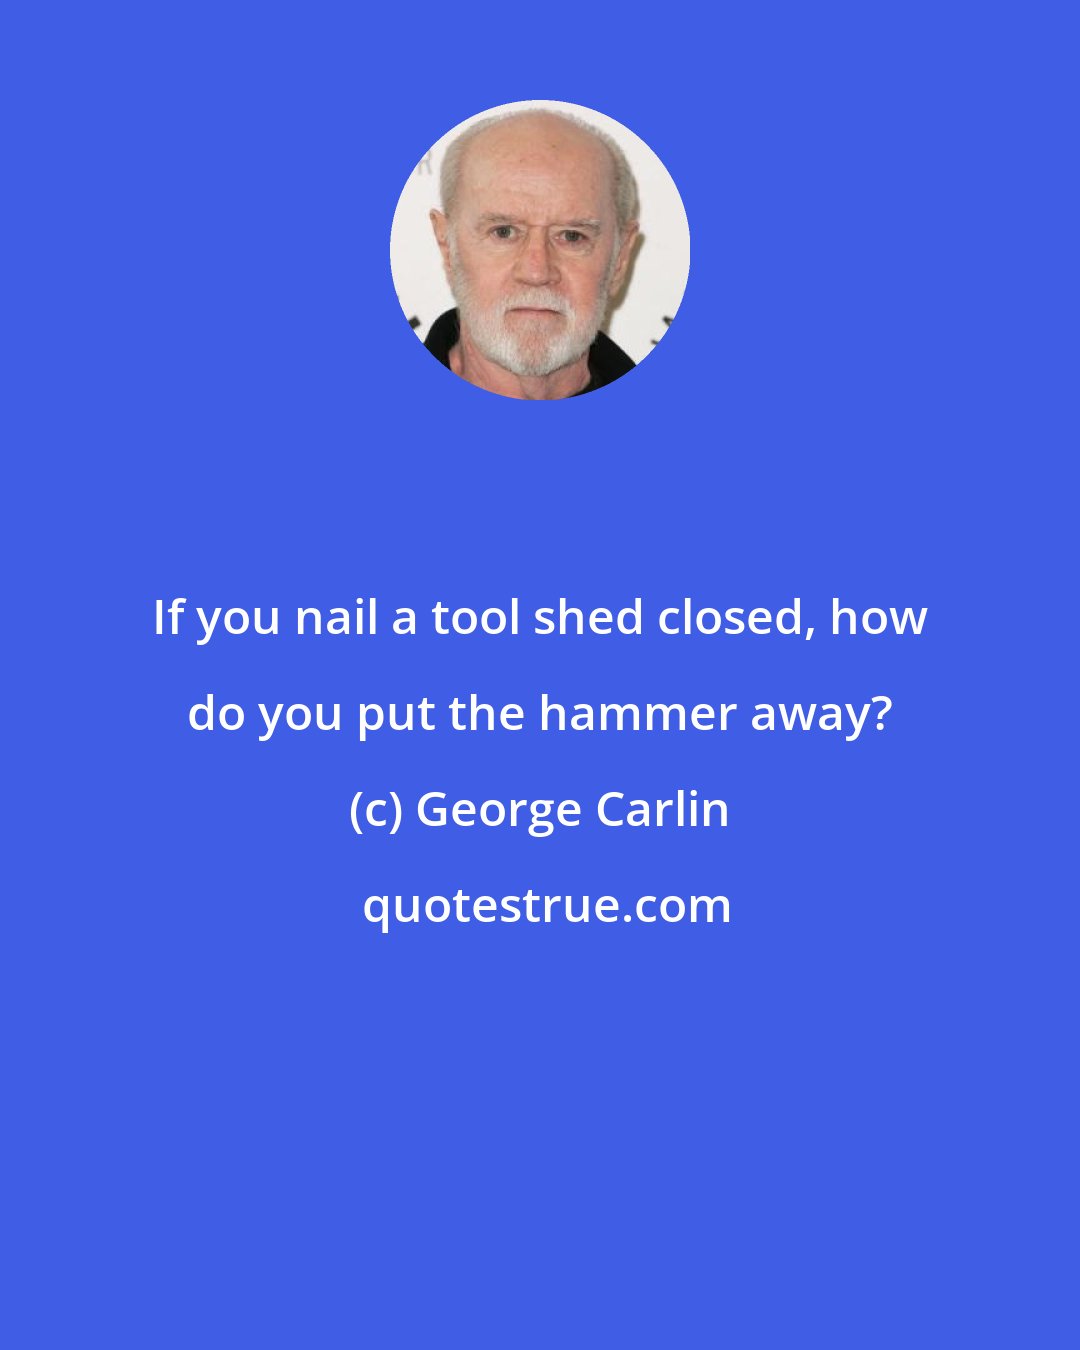 George Carlin: If you nail a tool shed closed, how do you put the hammer away?